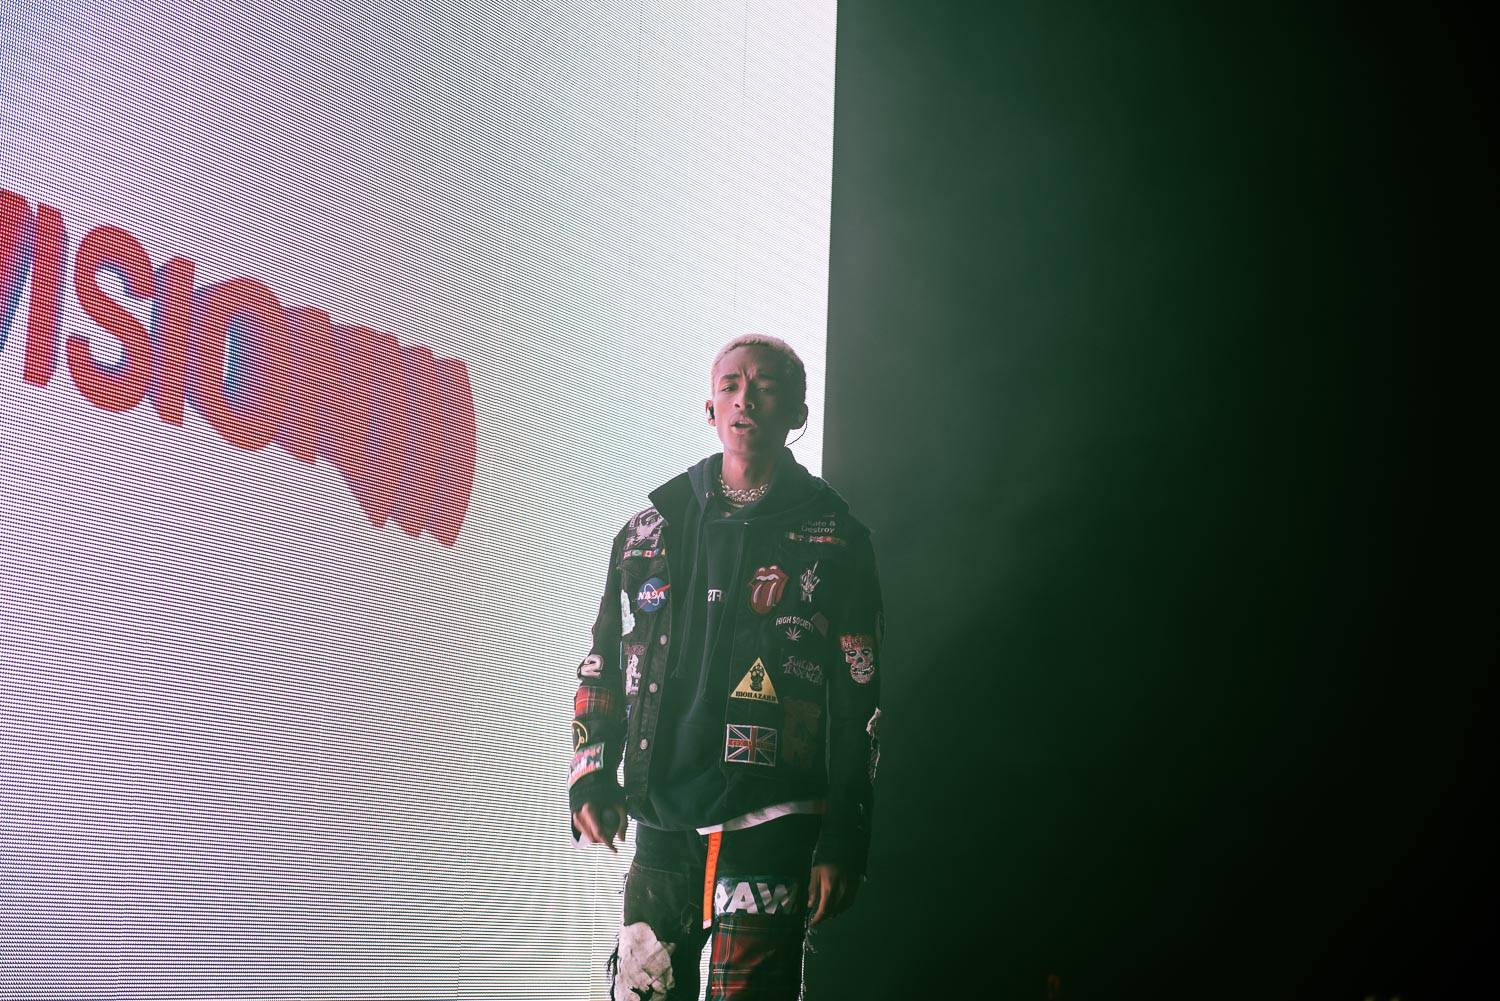 Jaden Smith at the Imperial, Vancouver, Apr 10 2018. Pavel Boiko photo.